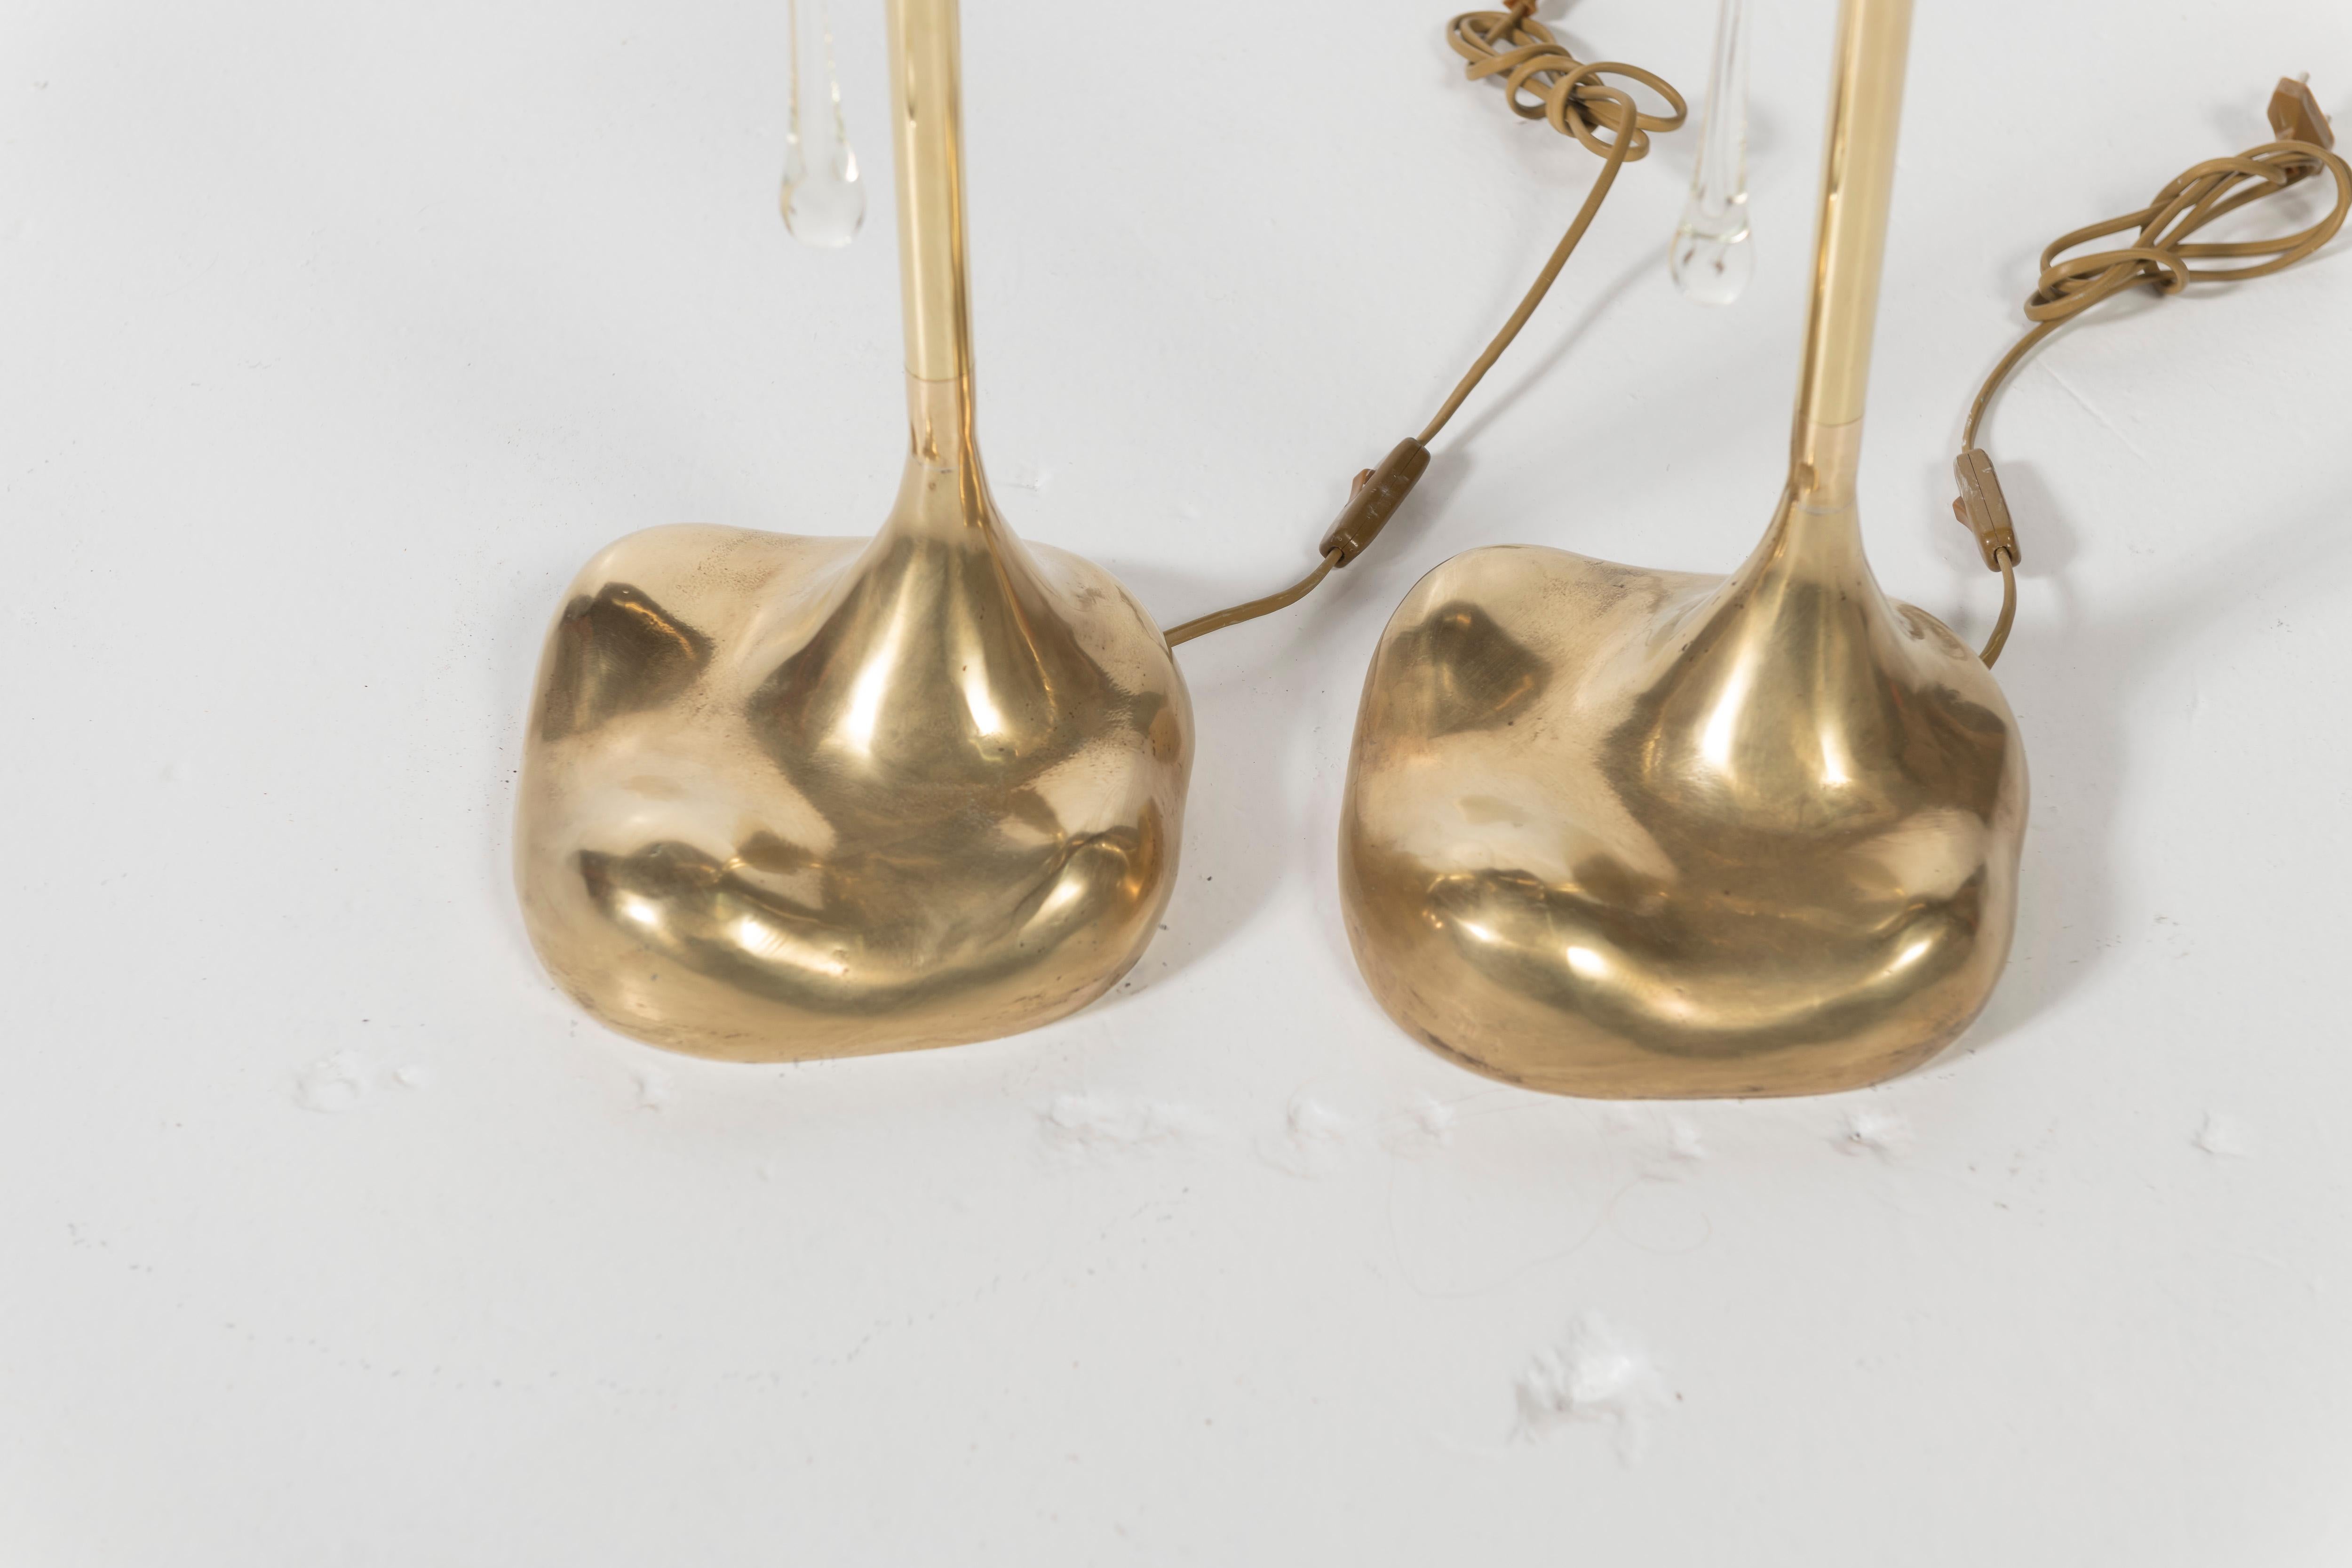 Pair of unusually shaped Italian mid-century tabletop lamps in metal with glass drops. The lights are certain to enlighten any surface and room in which they are placed with great design. Made in Florence, Italy. 

No shades included.